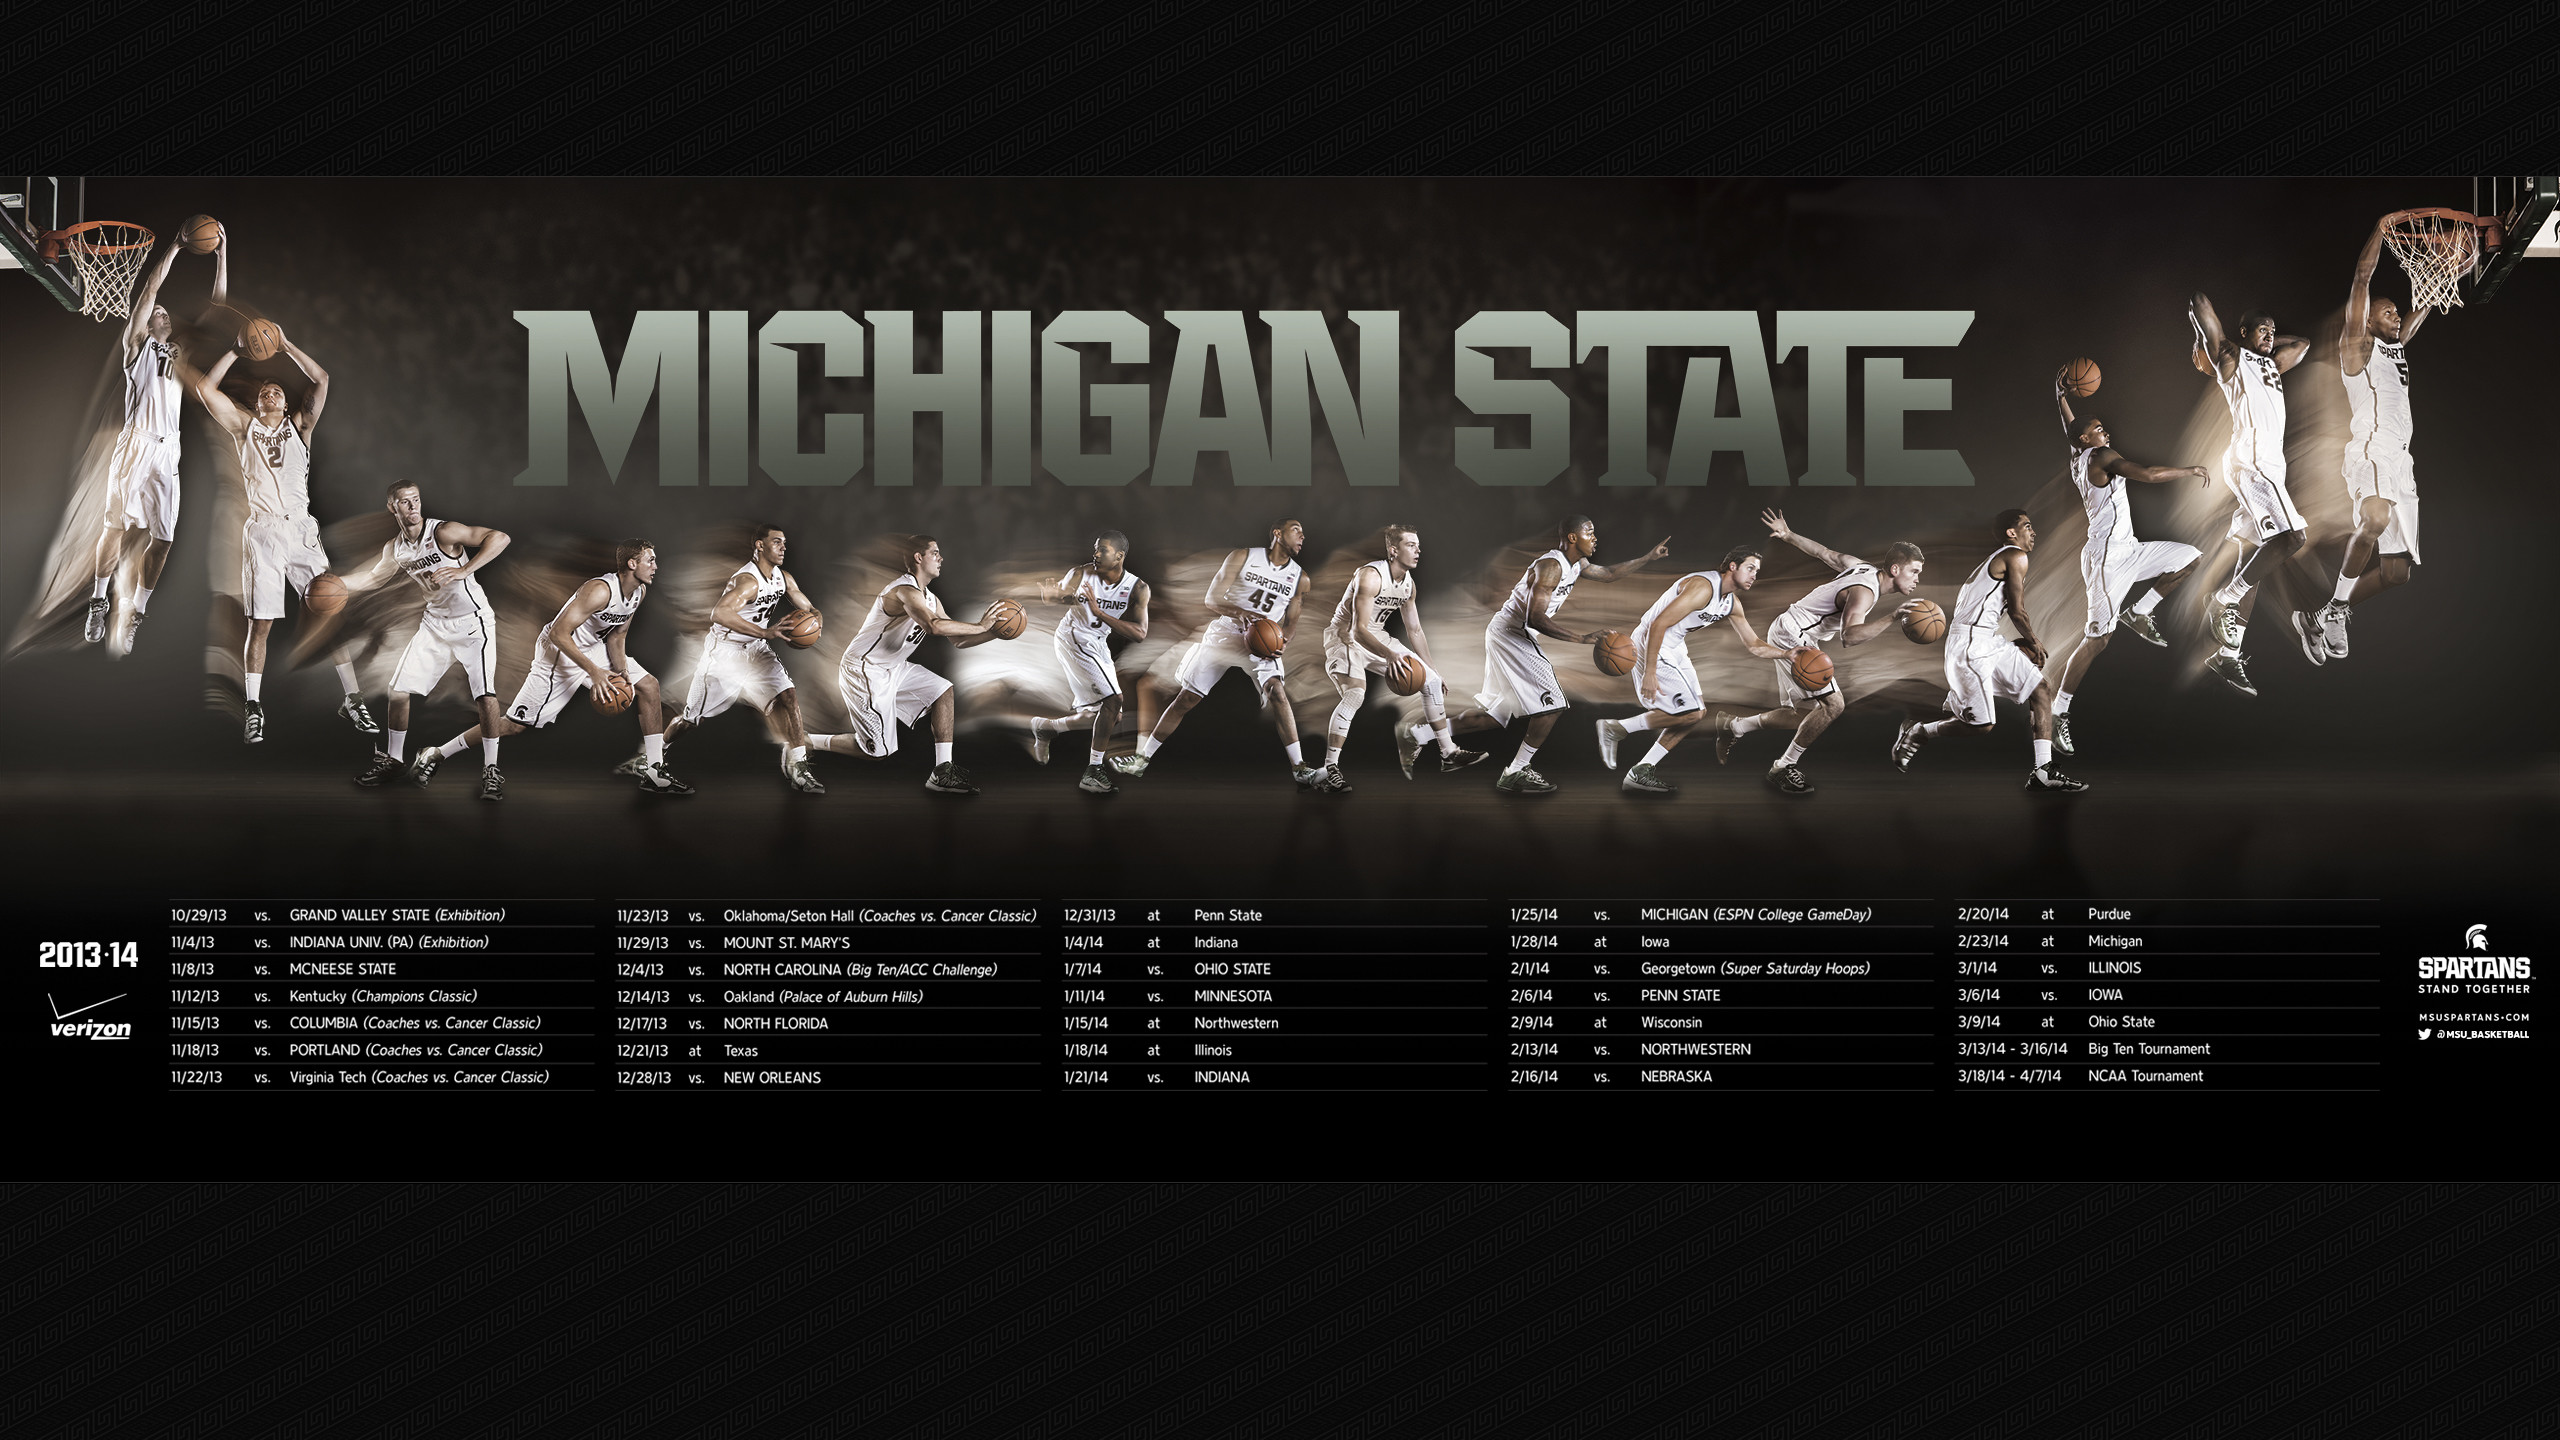 2560x1440 Michigan State Basketball Wallpaper Images & Pictures - Becuo